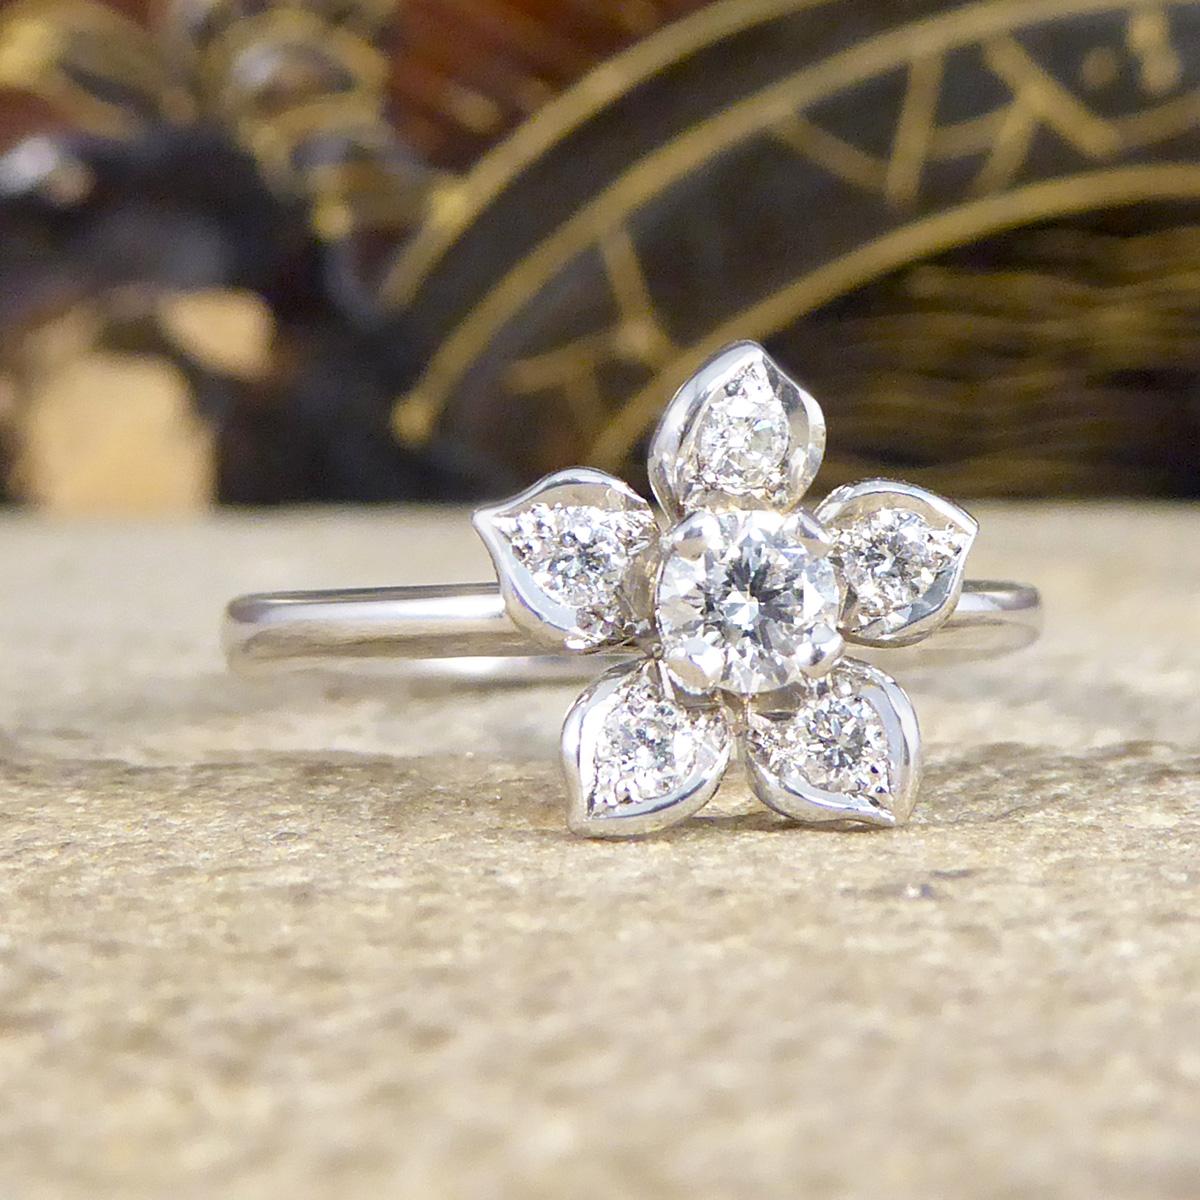 Such a lovely and dainty design. This ring has been carefully crafted with great detail and beautifully shaped petals each adorned with a single Diamond clustering a larger centre Diamond. Crafted fully in 18ct White Gold, this ring would make a